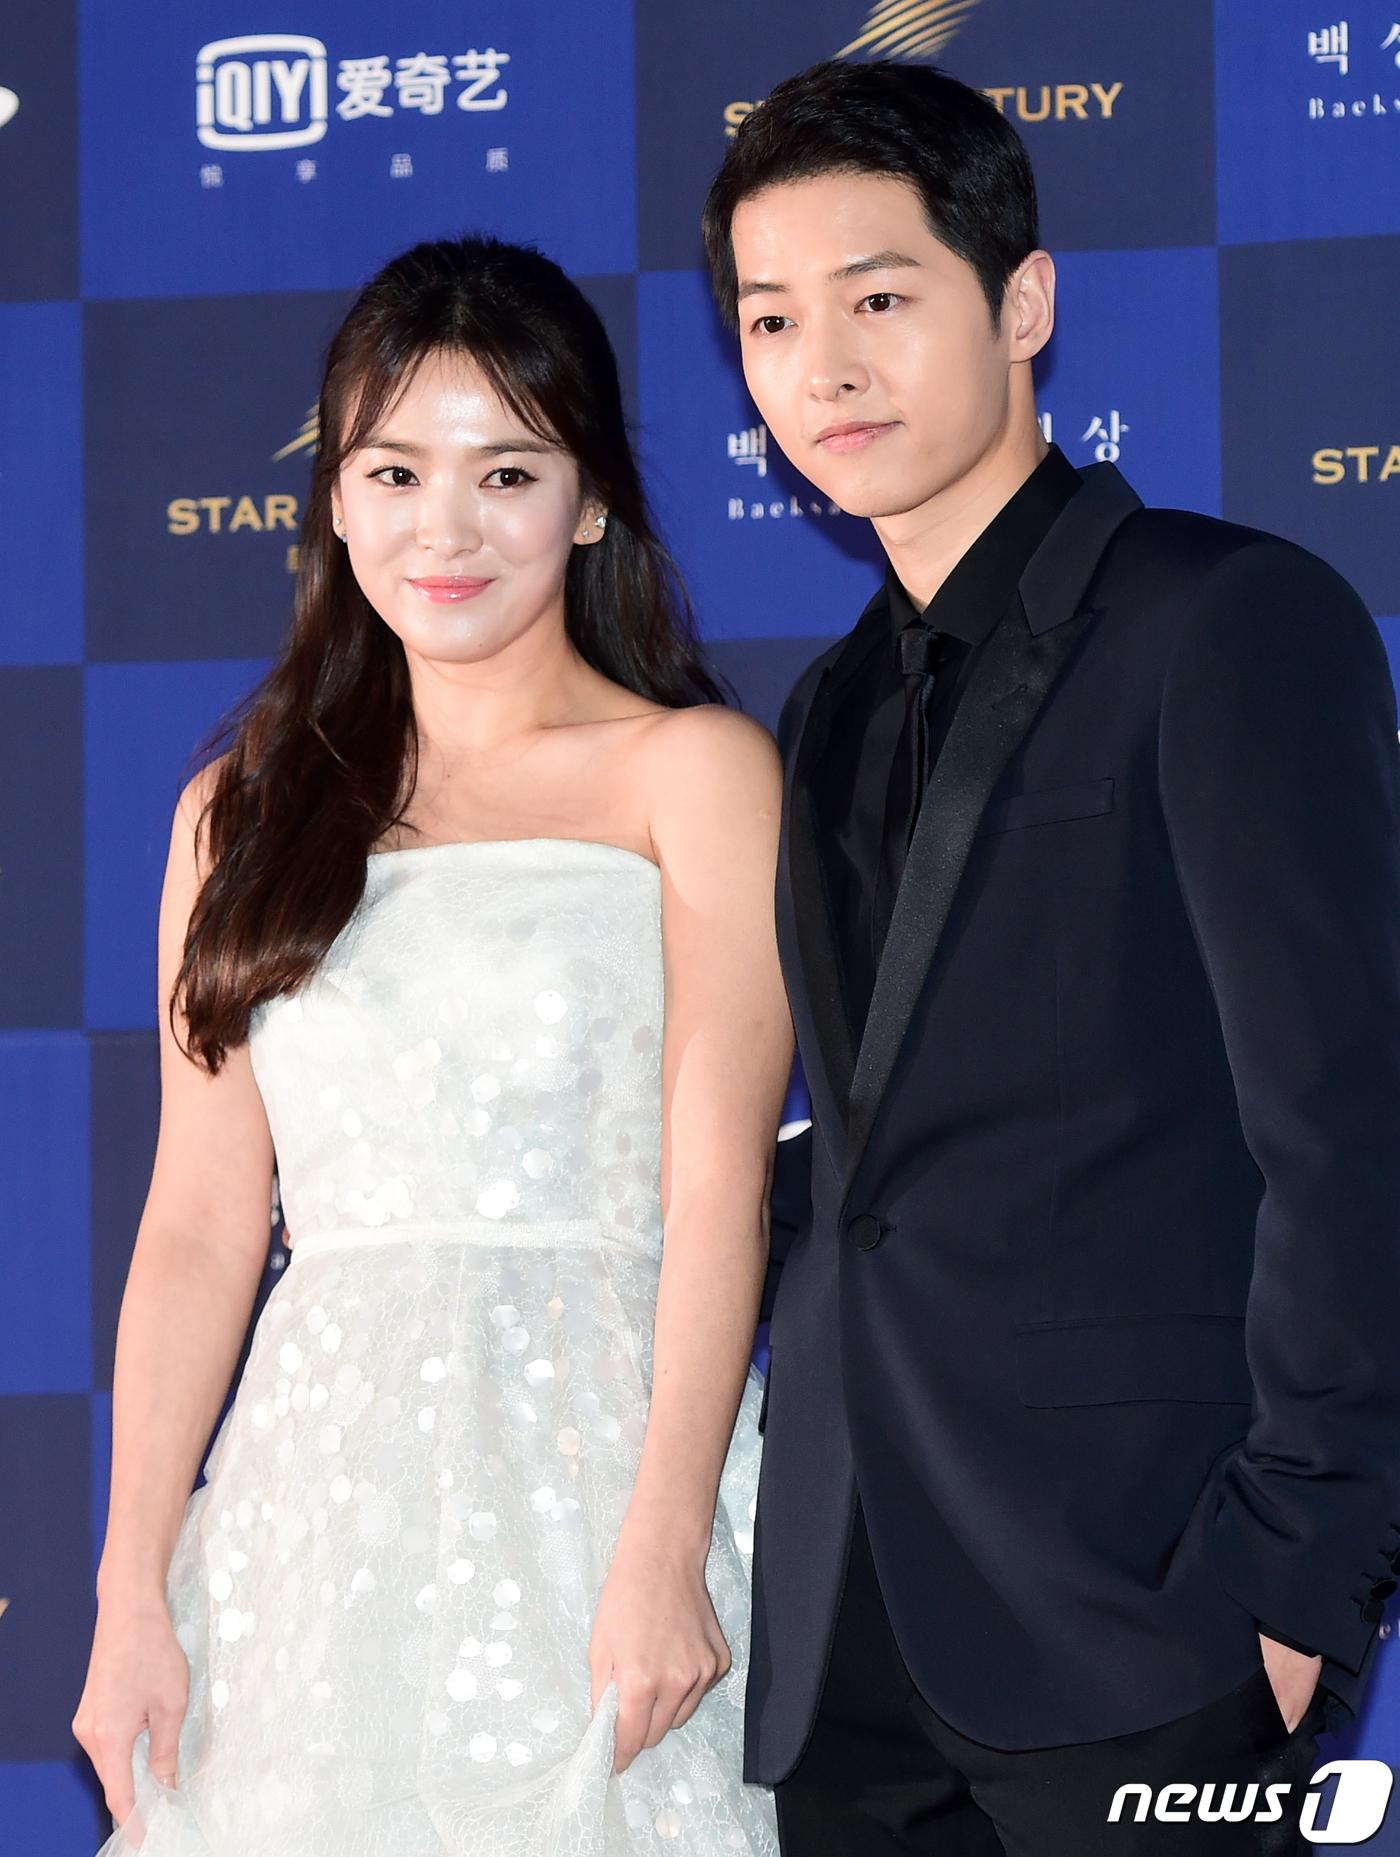 Seoul = = Actor Song Joong-ki (34) Song Hye-kyo (38) has applied for divorce settlement because of the burden of appearing in court.On the 27th, MBC entertainment information program Section TV said that Song Joong-ki Song Hye-kyo filed a divorce settlement application, not a settlement divorce, because he had to appear in court.If a divorce is made, the party must appear in the court at least twice, and if so, it can be photographed and reported in the media.Instead, if you apply for divorce mediation, you can adjust it by using your agent, and if both sides accept it when the results of the mediation are released, you can divorce without going to the court.Song Joong-ki said in a legal representative on the morning of the 27th, We have proceeded with the mediation process for divorce with Song Hye-kyo. Both of them are wrongly and hope to finish the divorce process smoothly rather than criticizing each other. Song Joong-kis agency Blossom Entertainment also said on the day, Song Joong-ki Song Hye-kyo Actor decided to finish his marriage after careful consideration, and is in the process of divorce after amicable agreement.Song Hye-kyo also announced the divorce news, saying, The reason is that the two sides can not overcome the difference between the two sides, and they have to make this decision.I am asking for your understanding that the other specific contents are the privacy of both Actors, so I would like to ask you to refrain from provocative reports and speculative comments for each other.The two divorced after a year and eight months of marriage.Those who made a connection with KBS 2TV drama Dawn of the Sun in 2016 developed into lovers after the drama, and married in October 2017.There were rumors surrounding them through the mobile Jirashi - mostly speculations about the reason for the divorce of the two.The name of Park Bo-gum, who shot Song Hye-kyo and Boyfriend together in Jirashi, is also mentioned.An official from Park Bo-gum said, It is not true that the related jirashi is not true, and I will respond strongly.